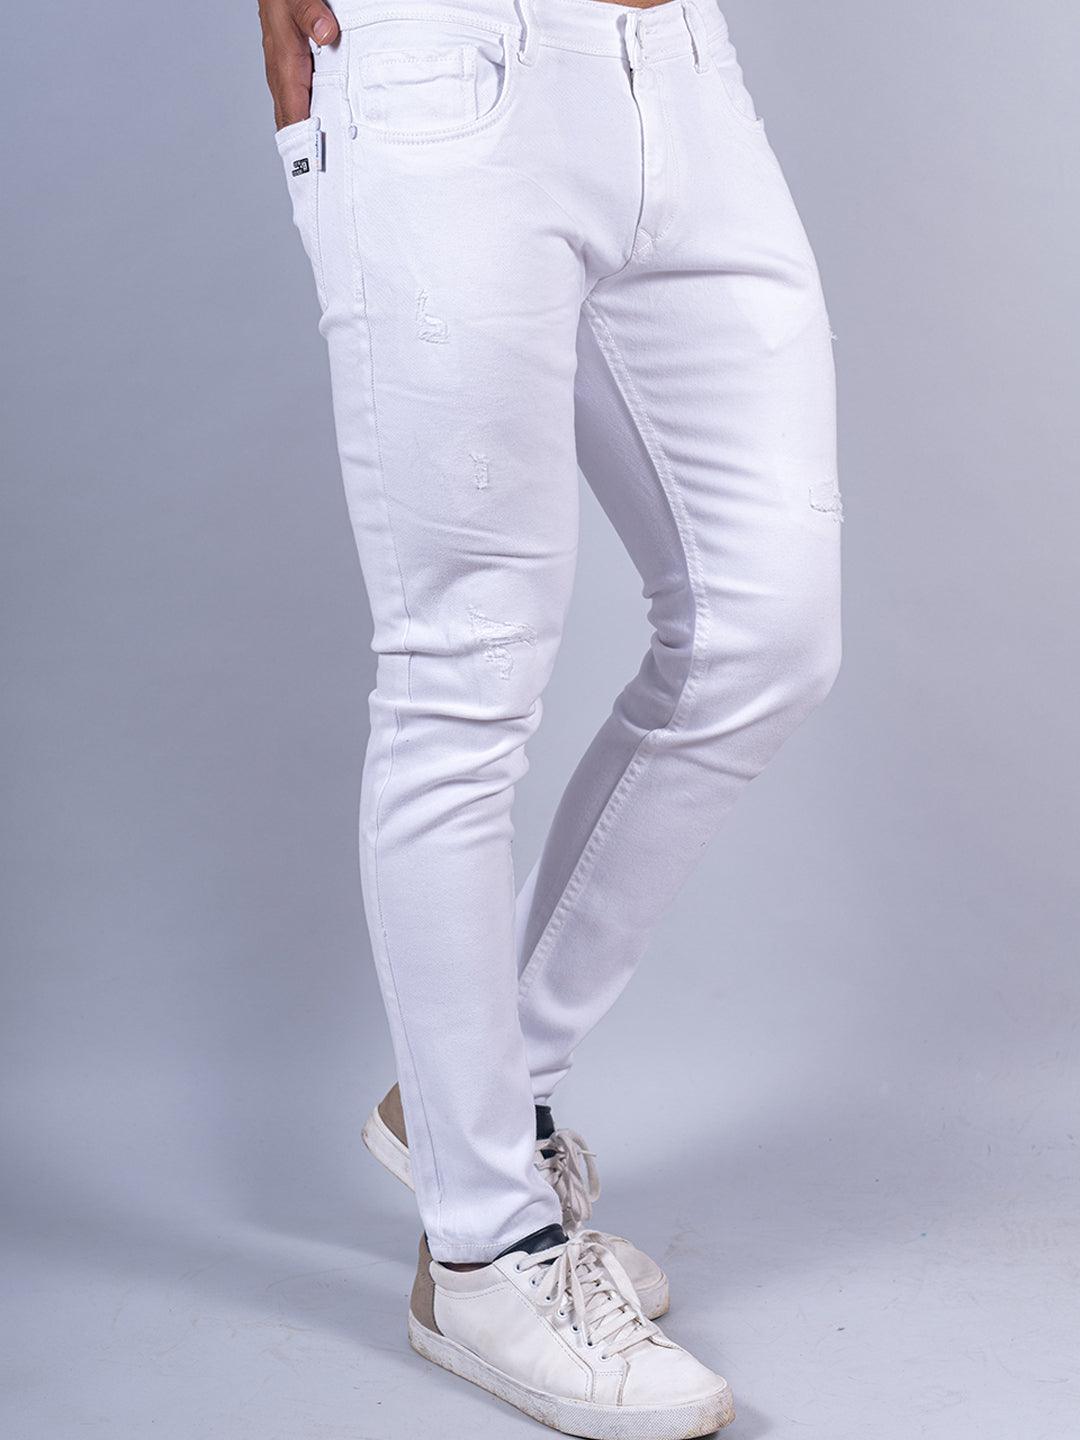 Men's Relaxed Vintage 60s 70s Bell Bottom Stretch Fit Classic Comfort  Flared Flares Retro Leg Disco Denim Jeans Pants, White, Large : Amazon.in:  Clothing & Accessories